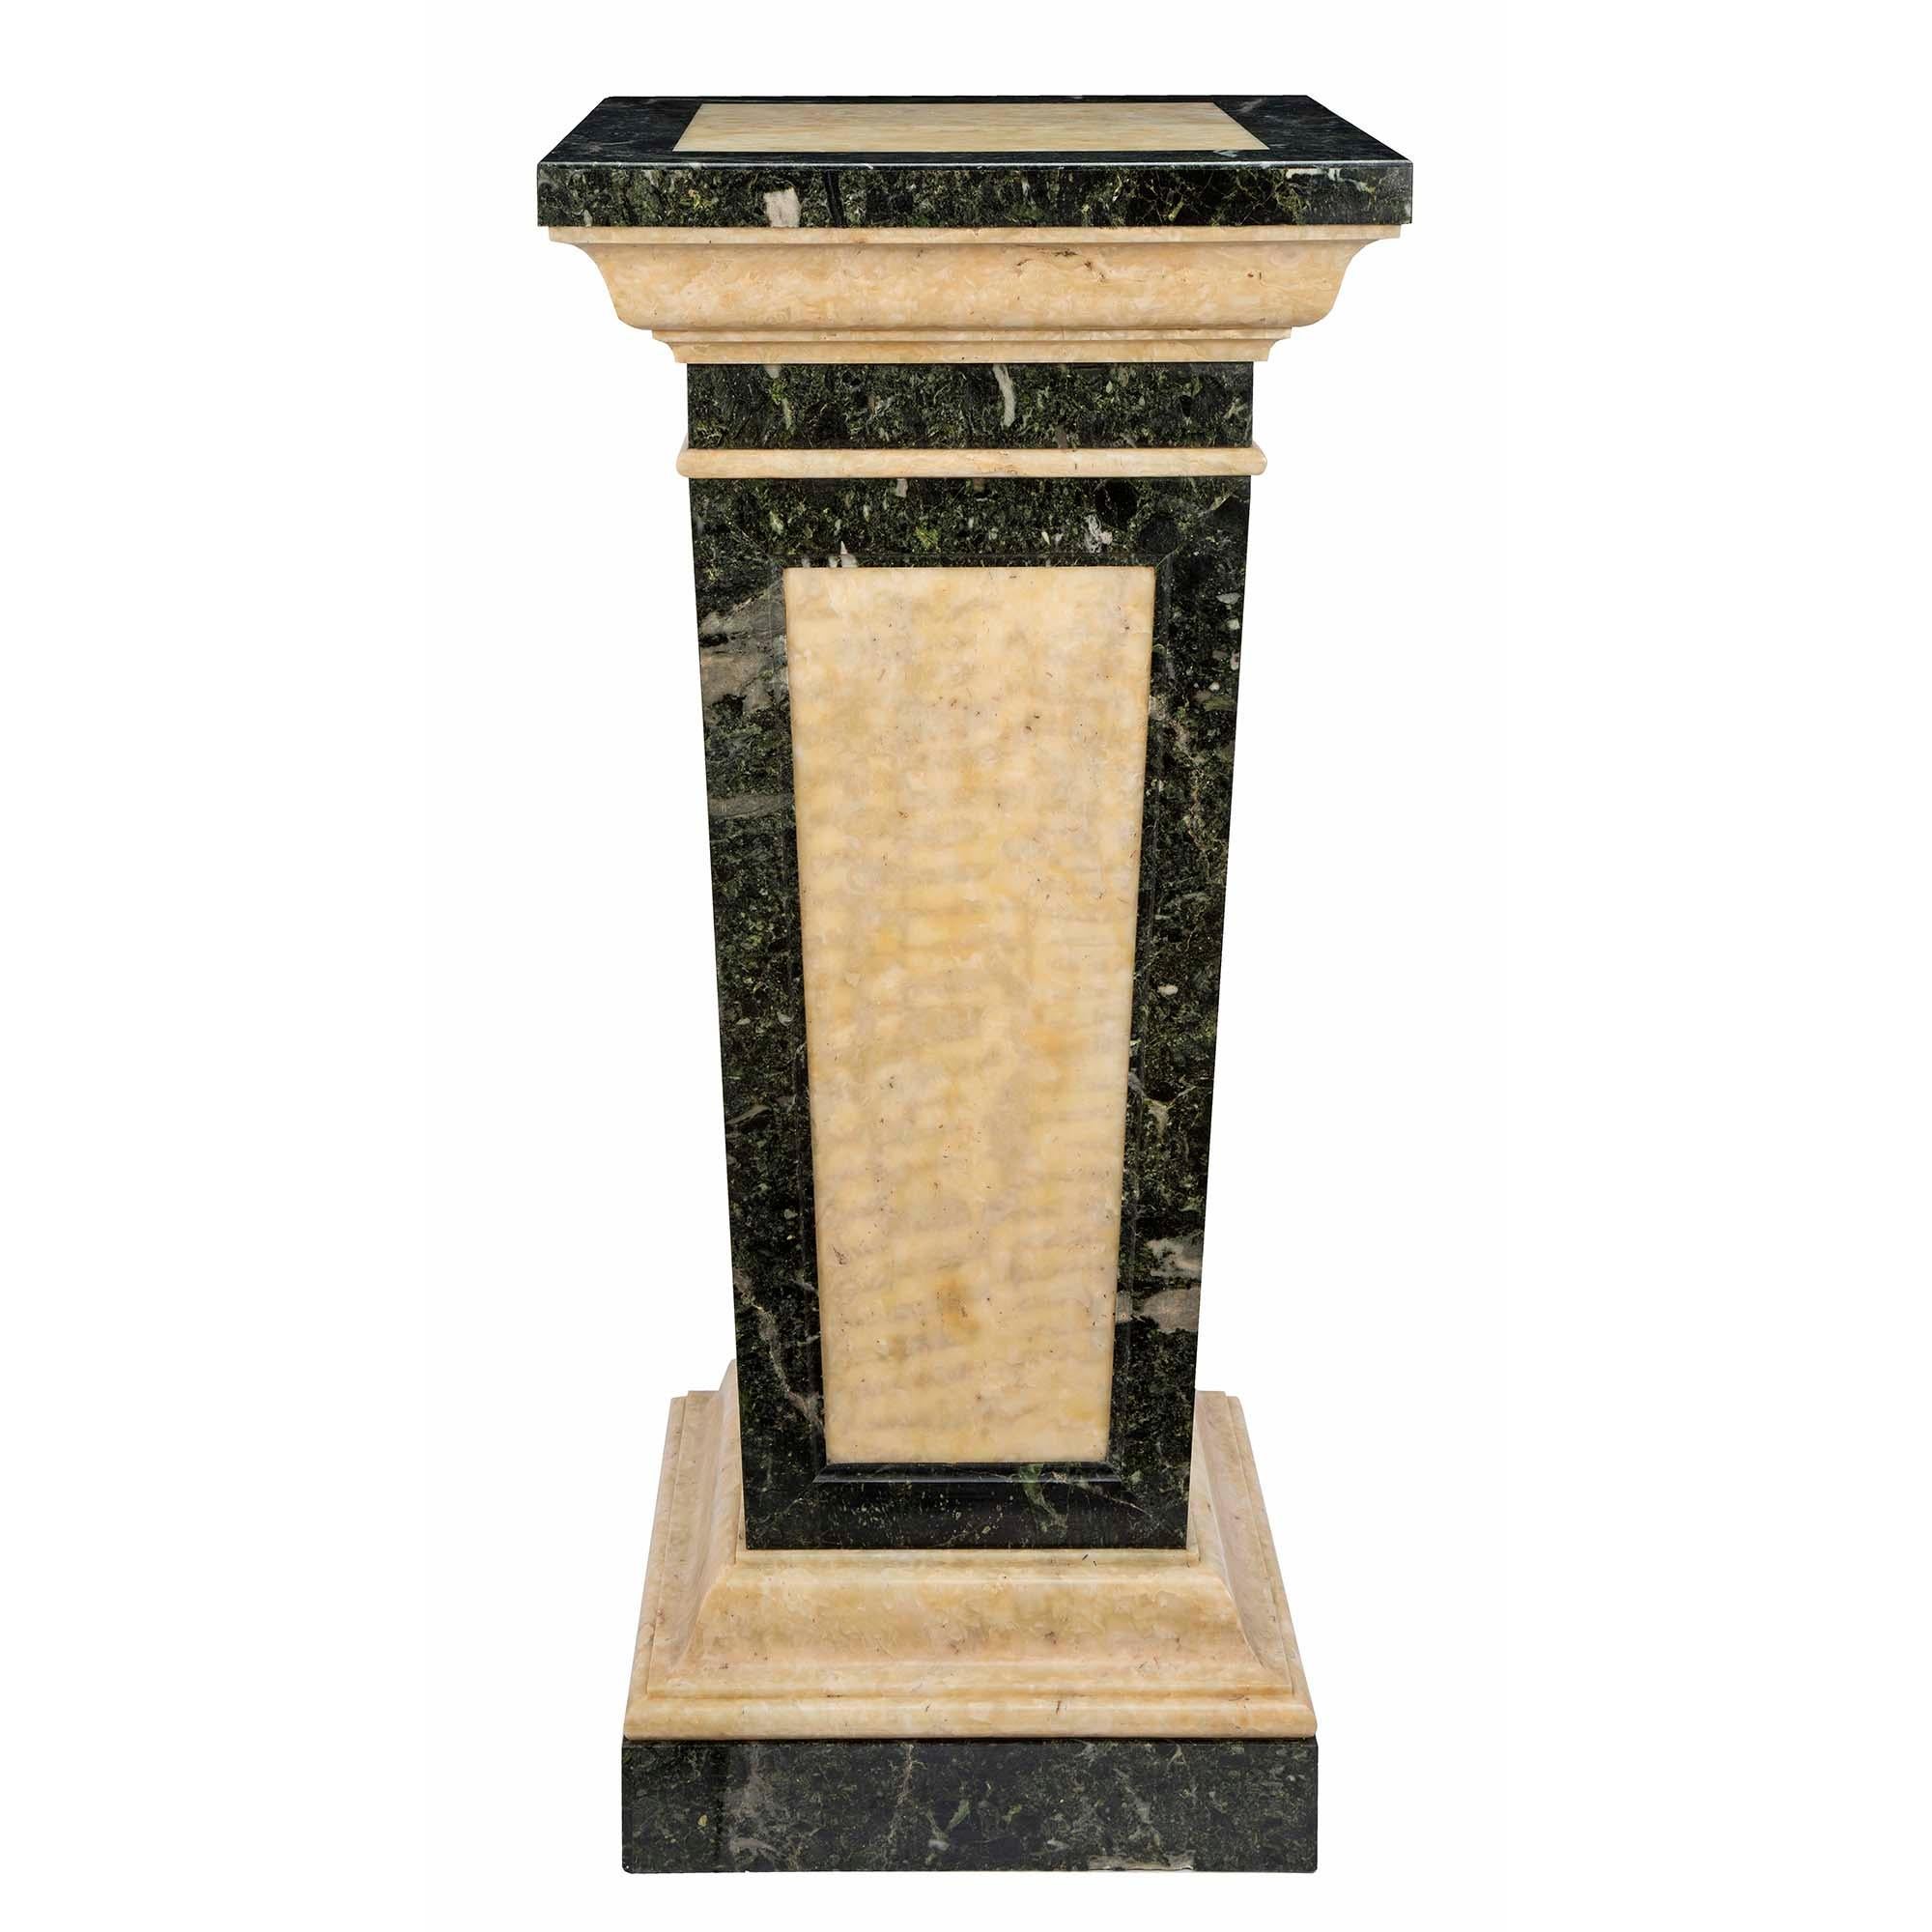 Italian Late 19th Century Neoclassical Style Alabaster and Marble Pedestal In Good Condition For Sale In West Palm Beach, FL